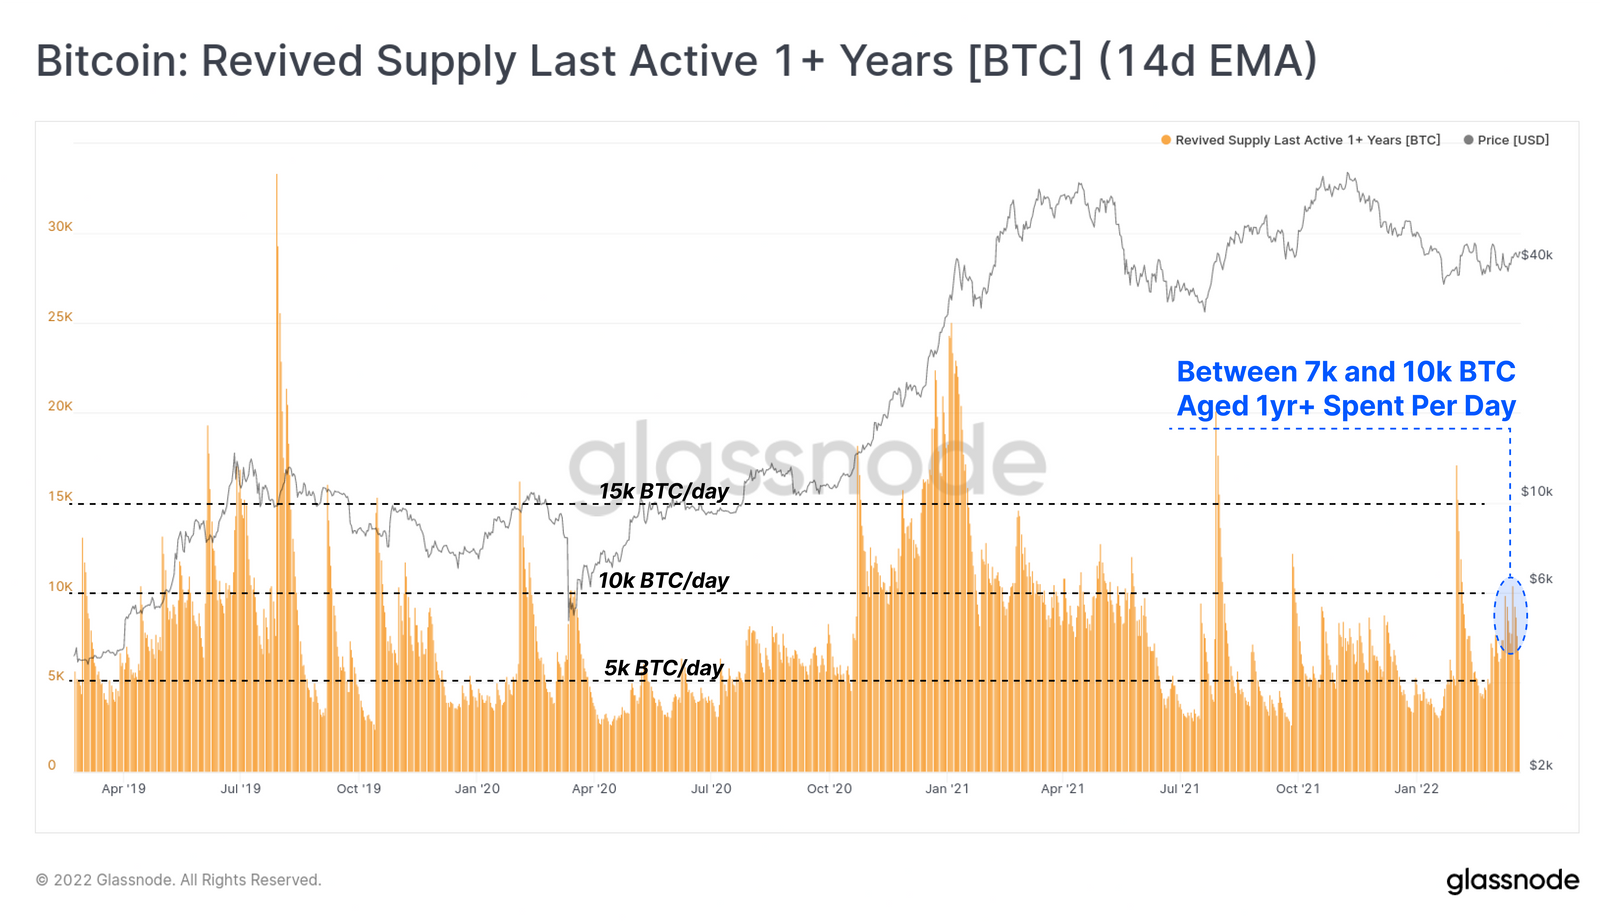 Bitcoin: Revived Supply Last Active 1+ Years [BTC] (14d EMA)